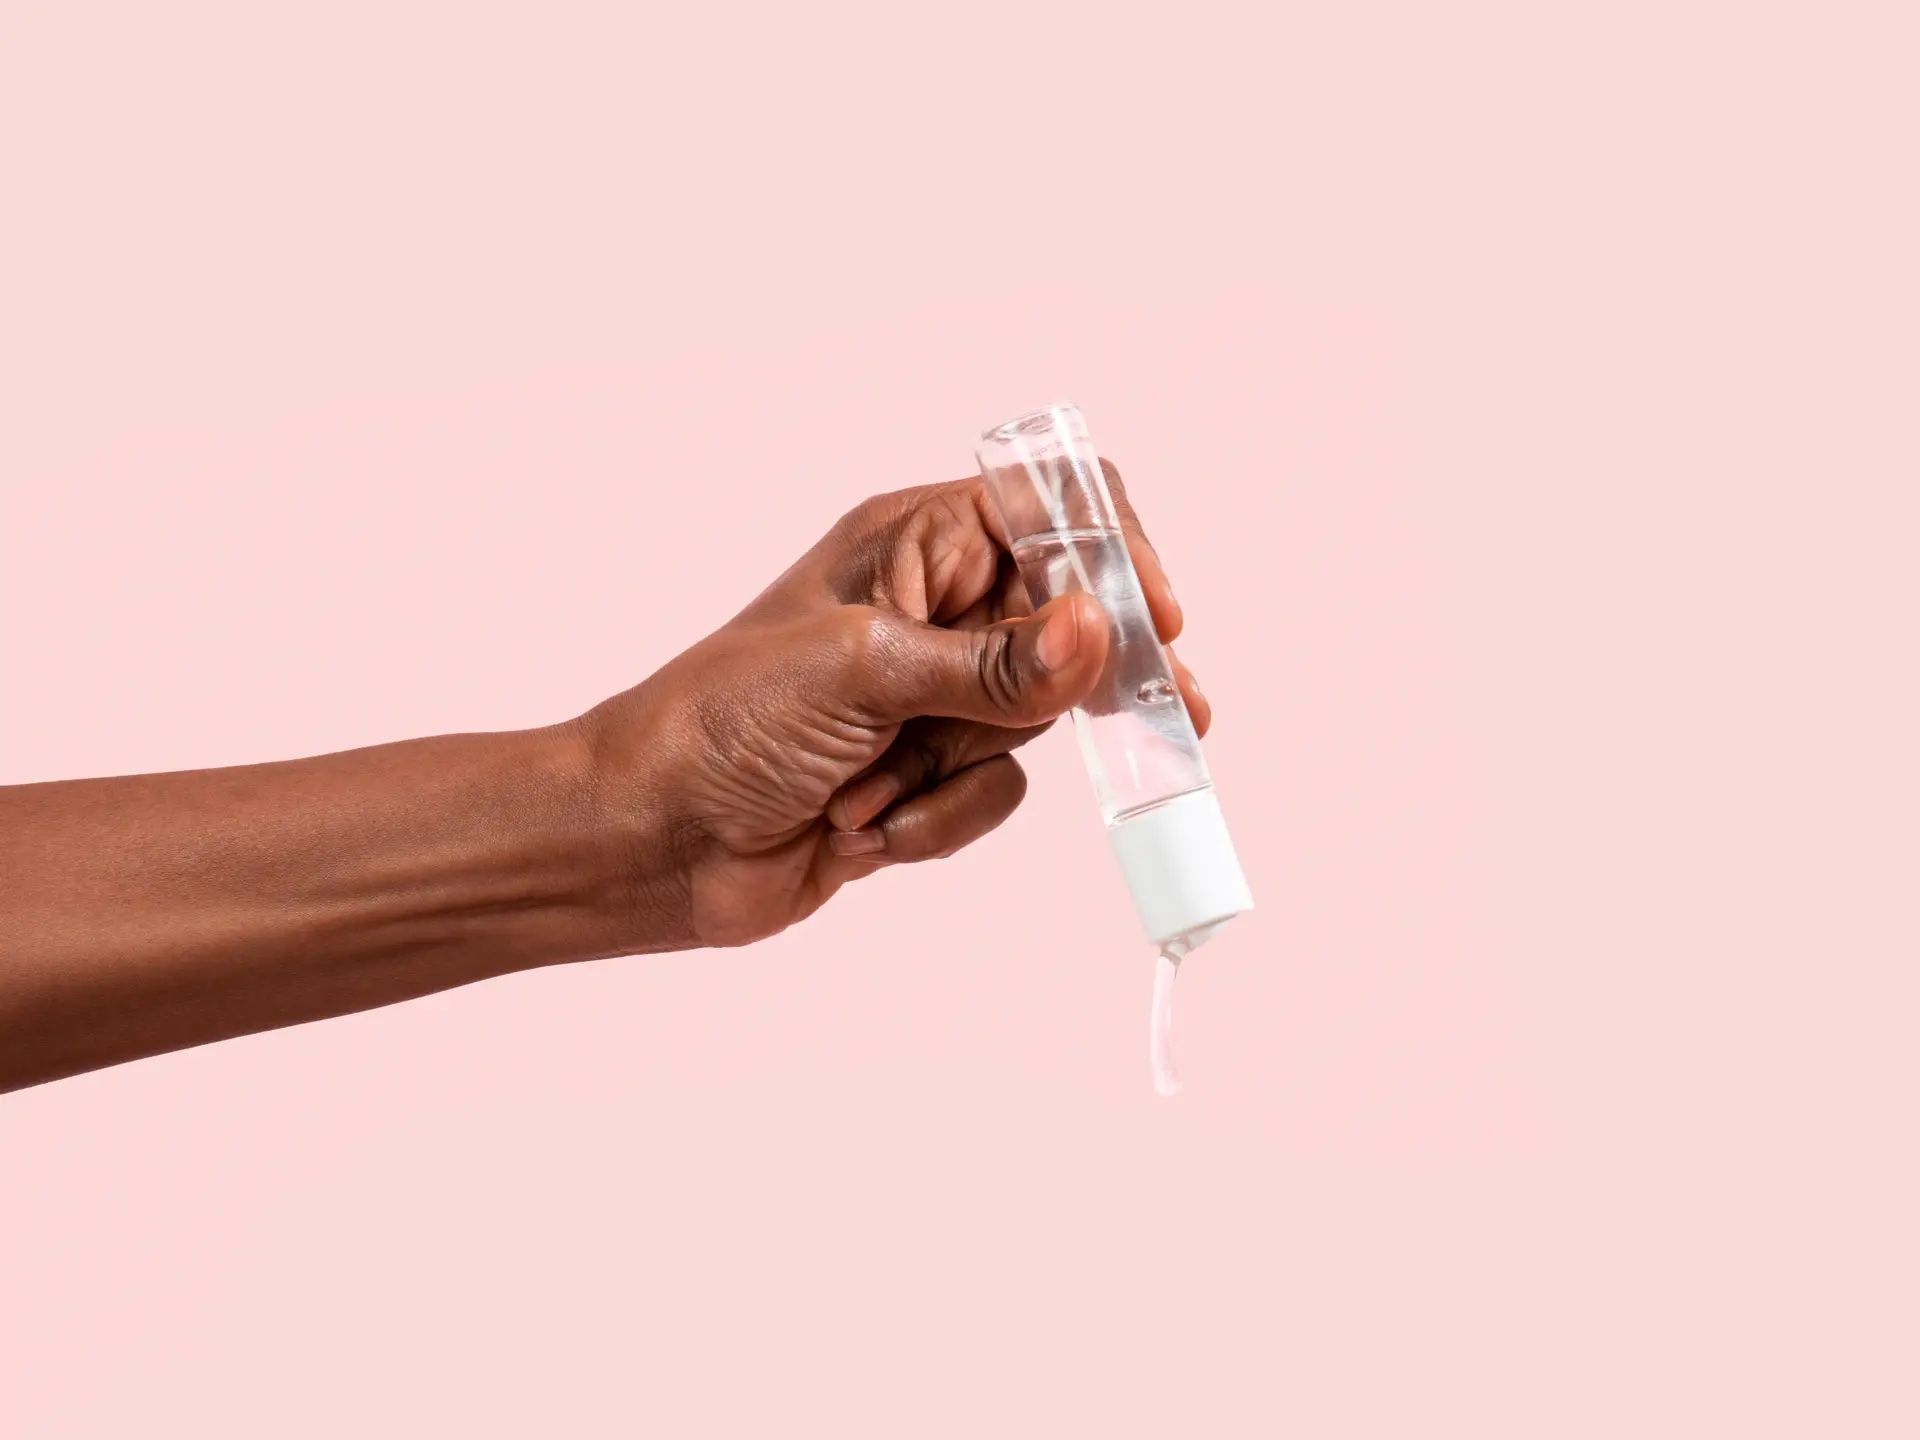 Hand pouring Wisp Harmonizing Lube against a pink background